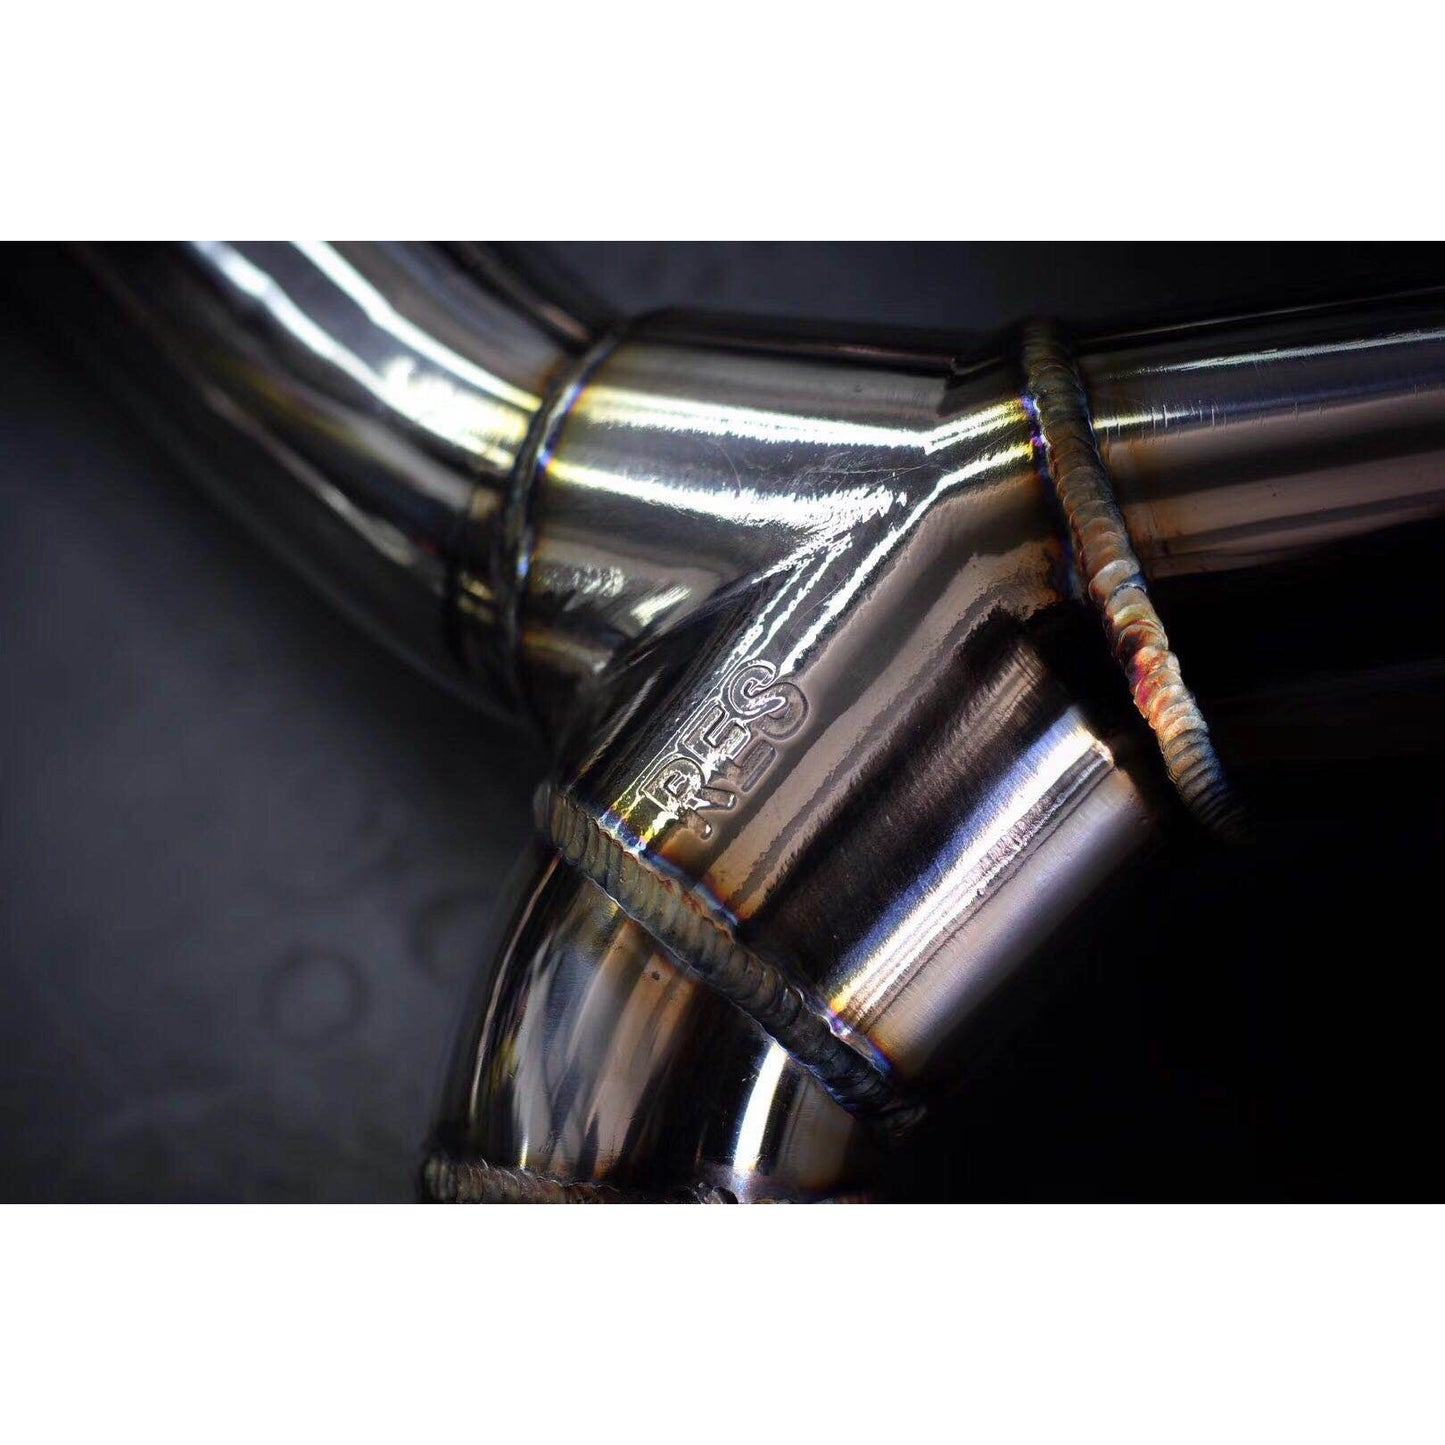 RES Valvetronic Catback Exhaust - 2008+Nissan GTR-Cat Back Exhaust System-RES-JDMuscle